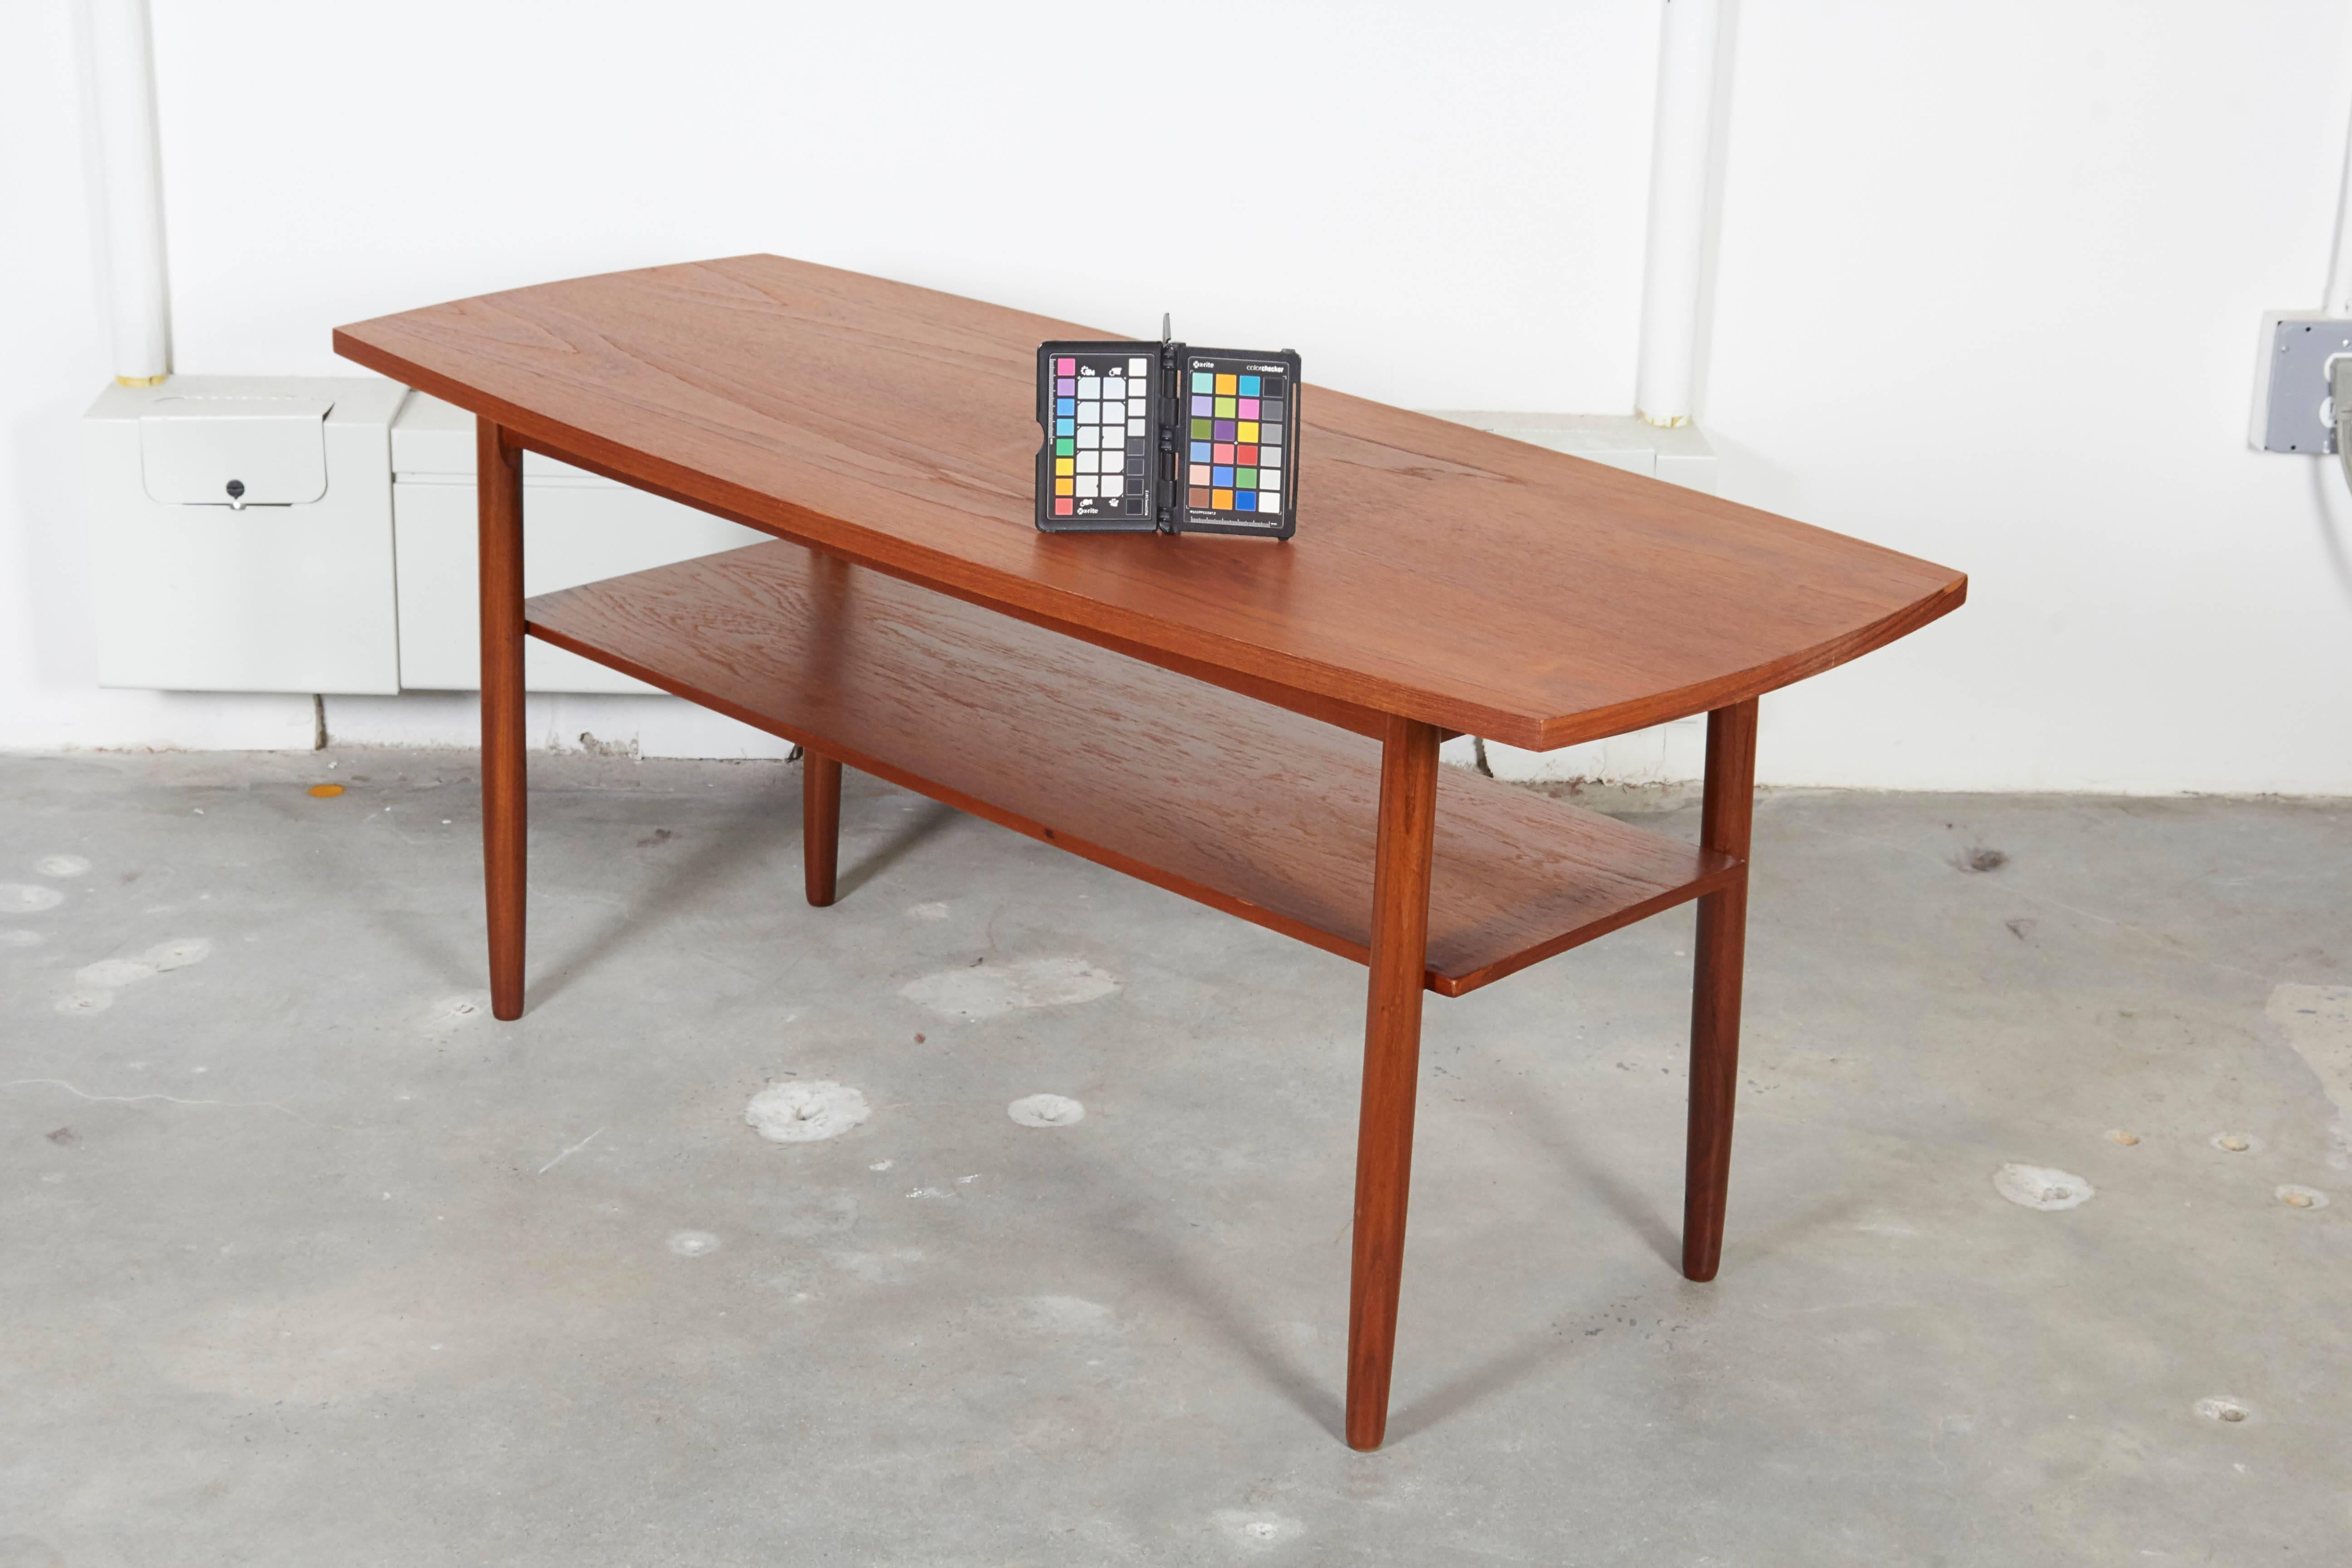 Vintage 1960s Danish Teak Coffee Table

This surfboard coffee table is in excellent condition. The bottom shelf and small size make it a perfect fit for any living room. Ready for pick up, delivery, or shipping anywhere in the world. 